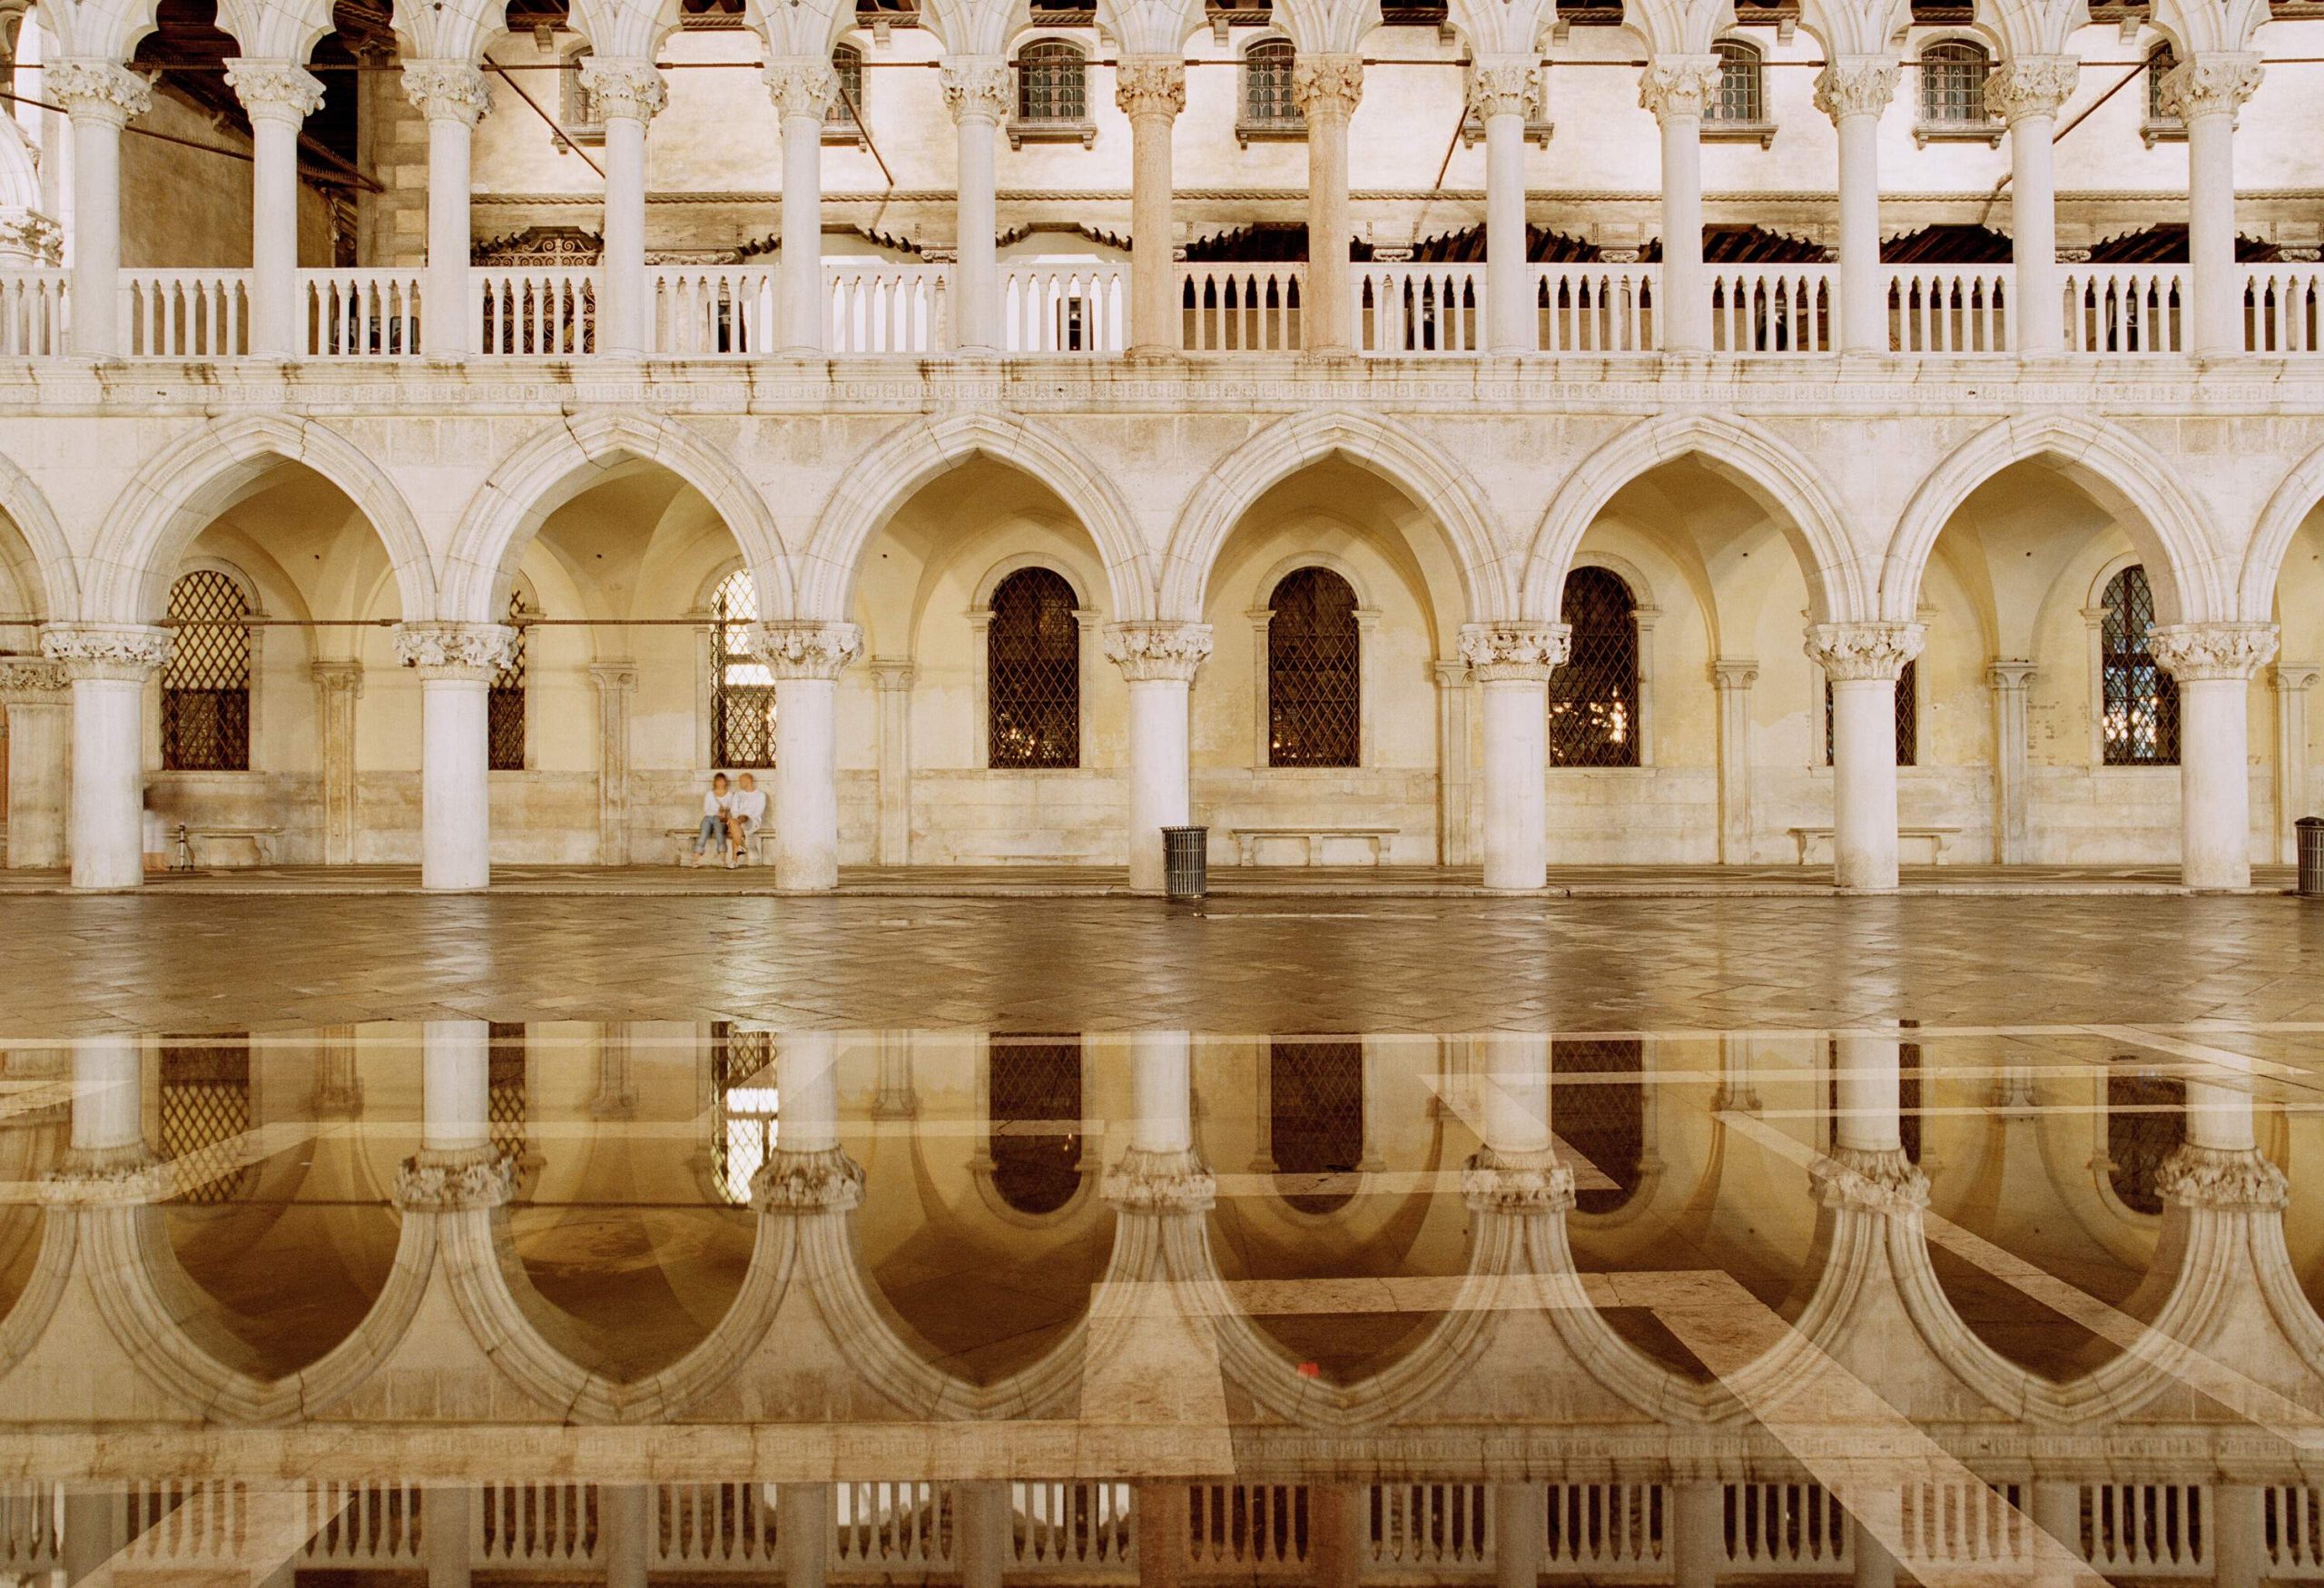 A wet floor reflects the image of a pillared archway and a pillared balcony with clover-shaped details.